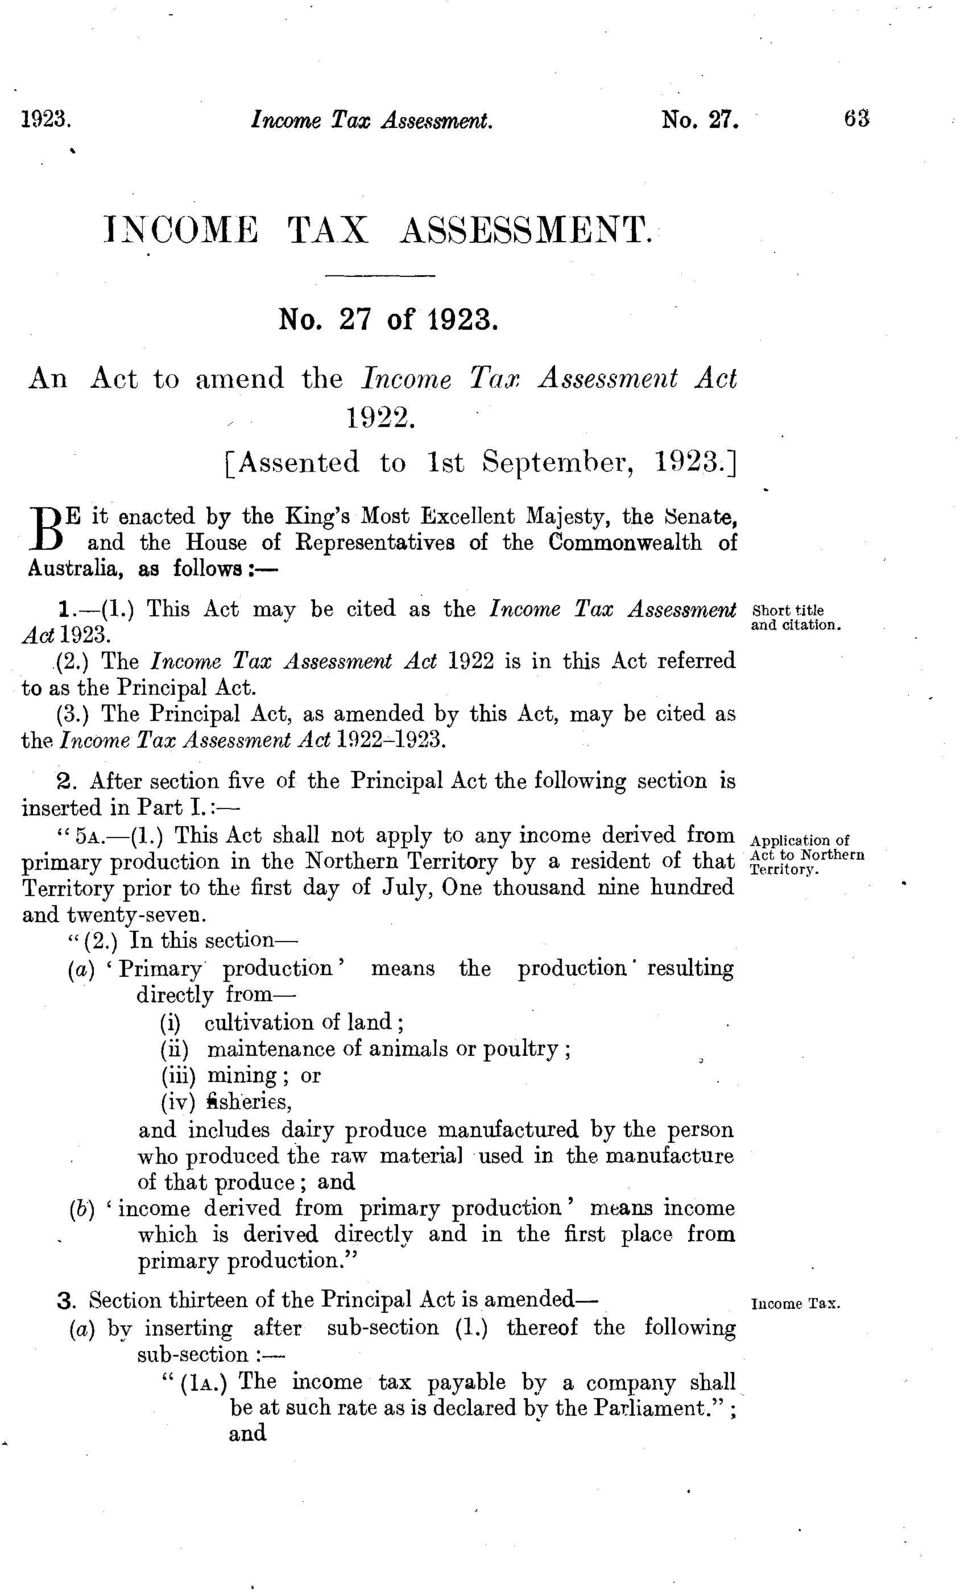 ) This Act may be cited as the Income Tax Assessment Act 1923. (2.) The Income Tax Assessment Act 1922 is in this Act referred to as the Principal Act. (3.